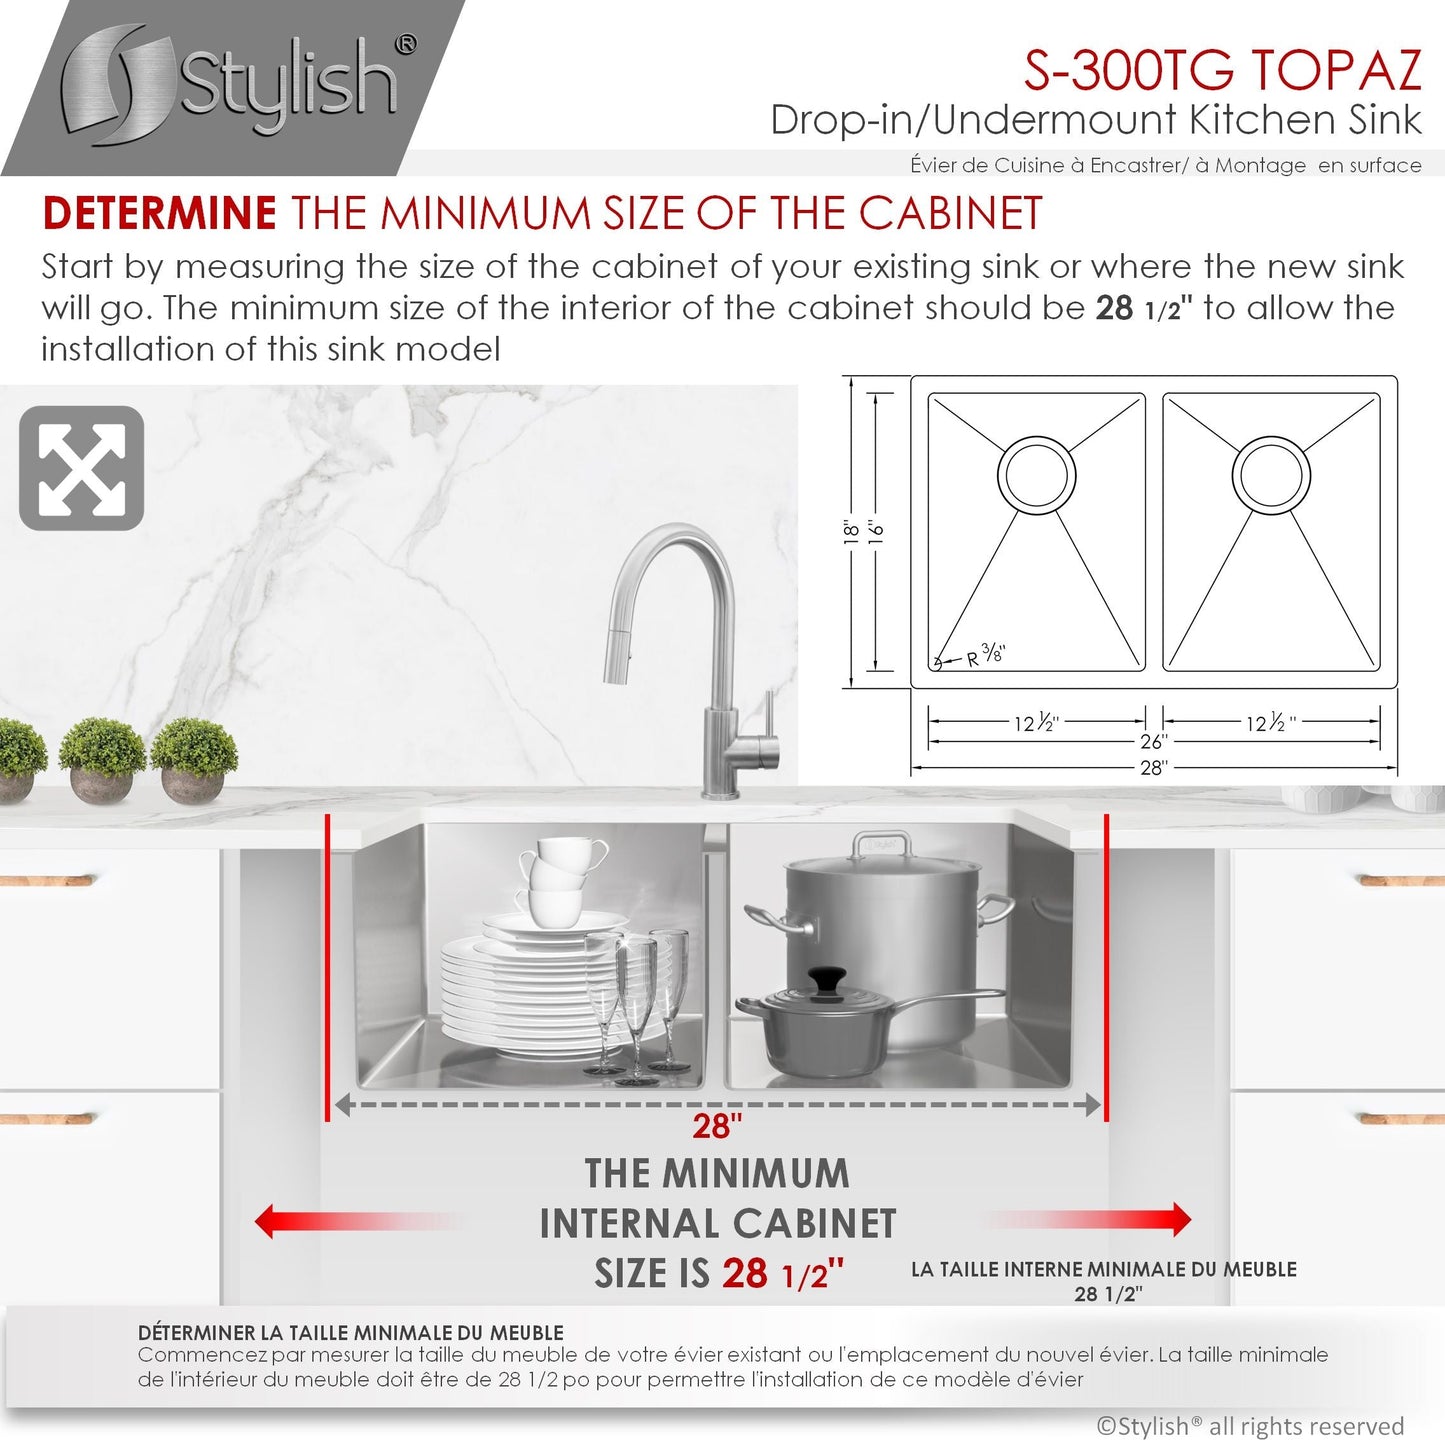 Stylish TOPAZ 28" x 18" Dual Mount Double Bowl Kitchen Sink, 18 Gauge Stainless Steel with Grids and Basket Strainers, S-300TG